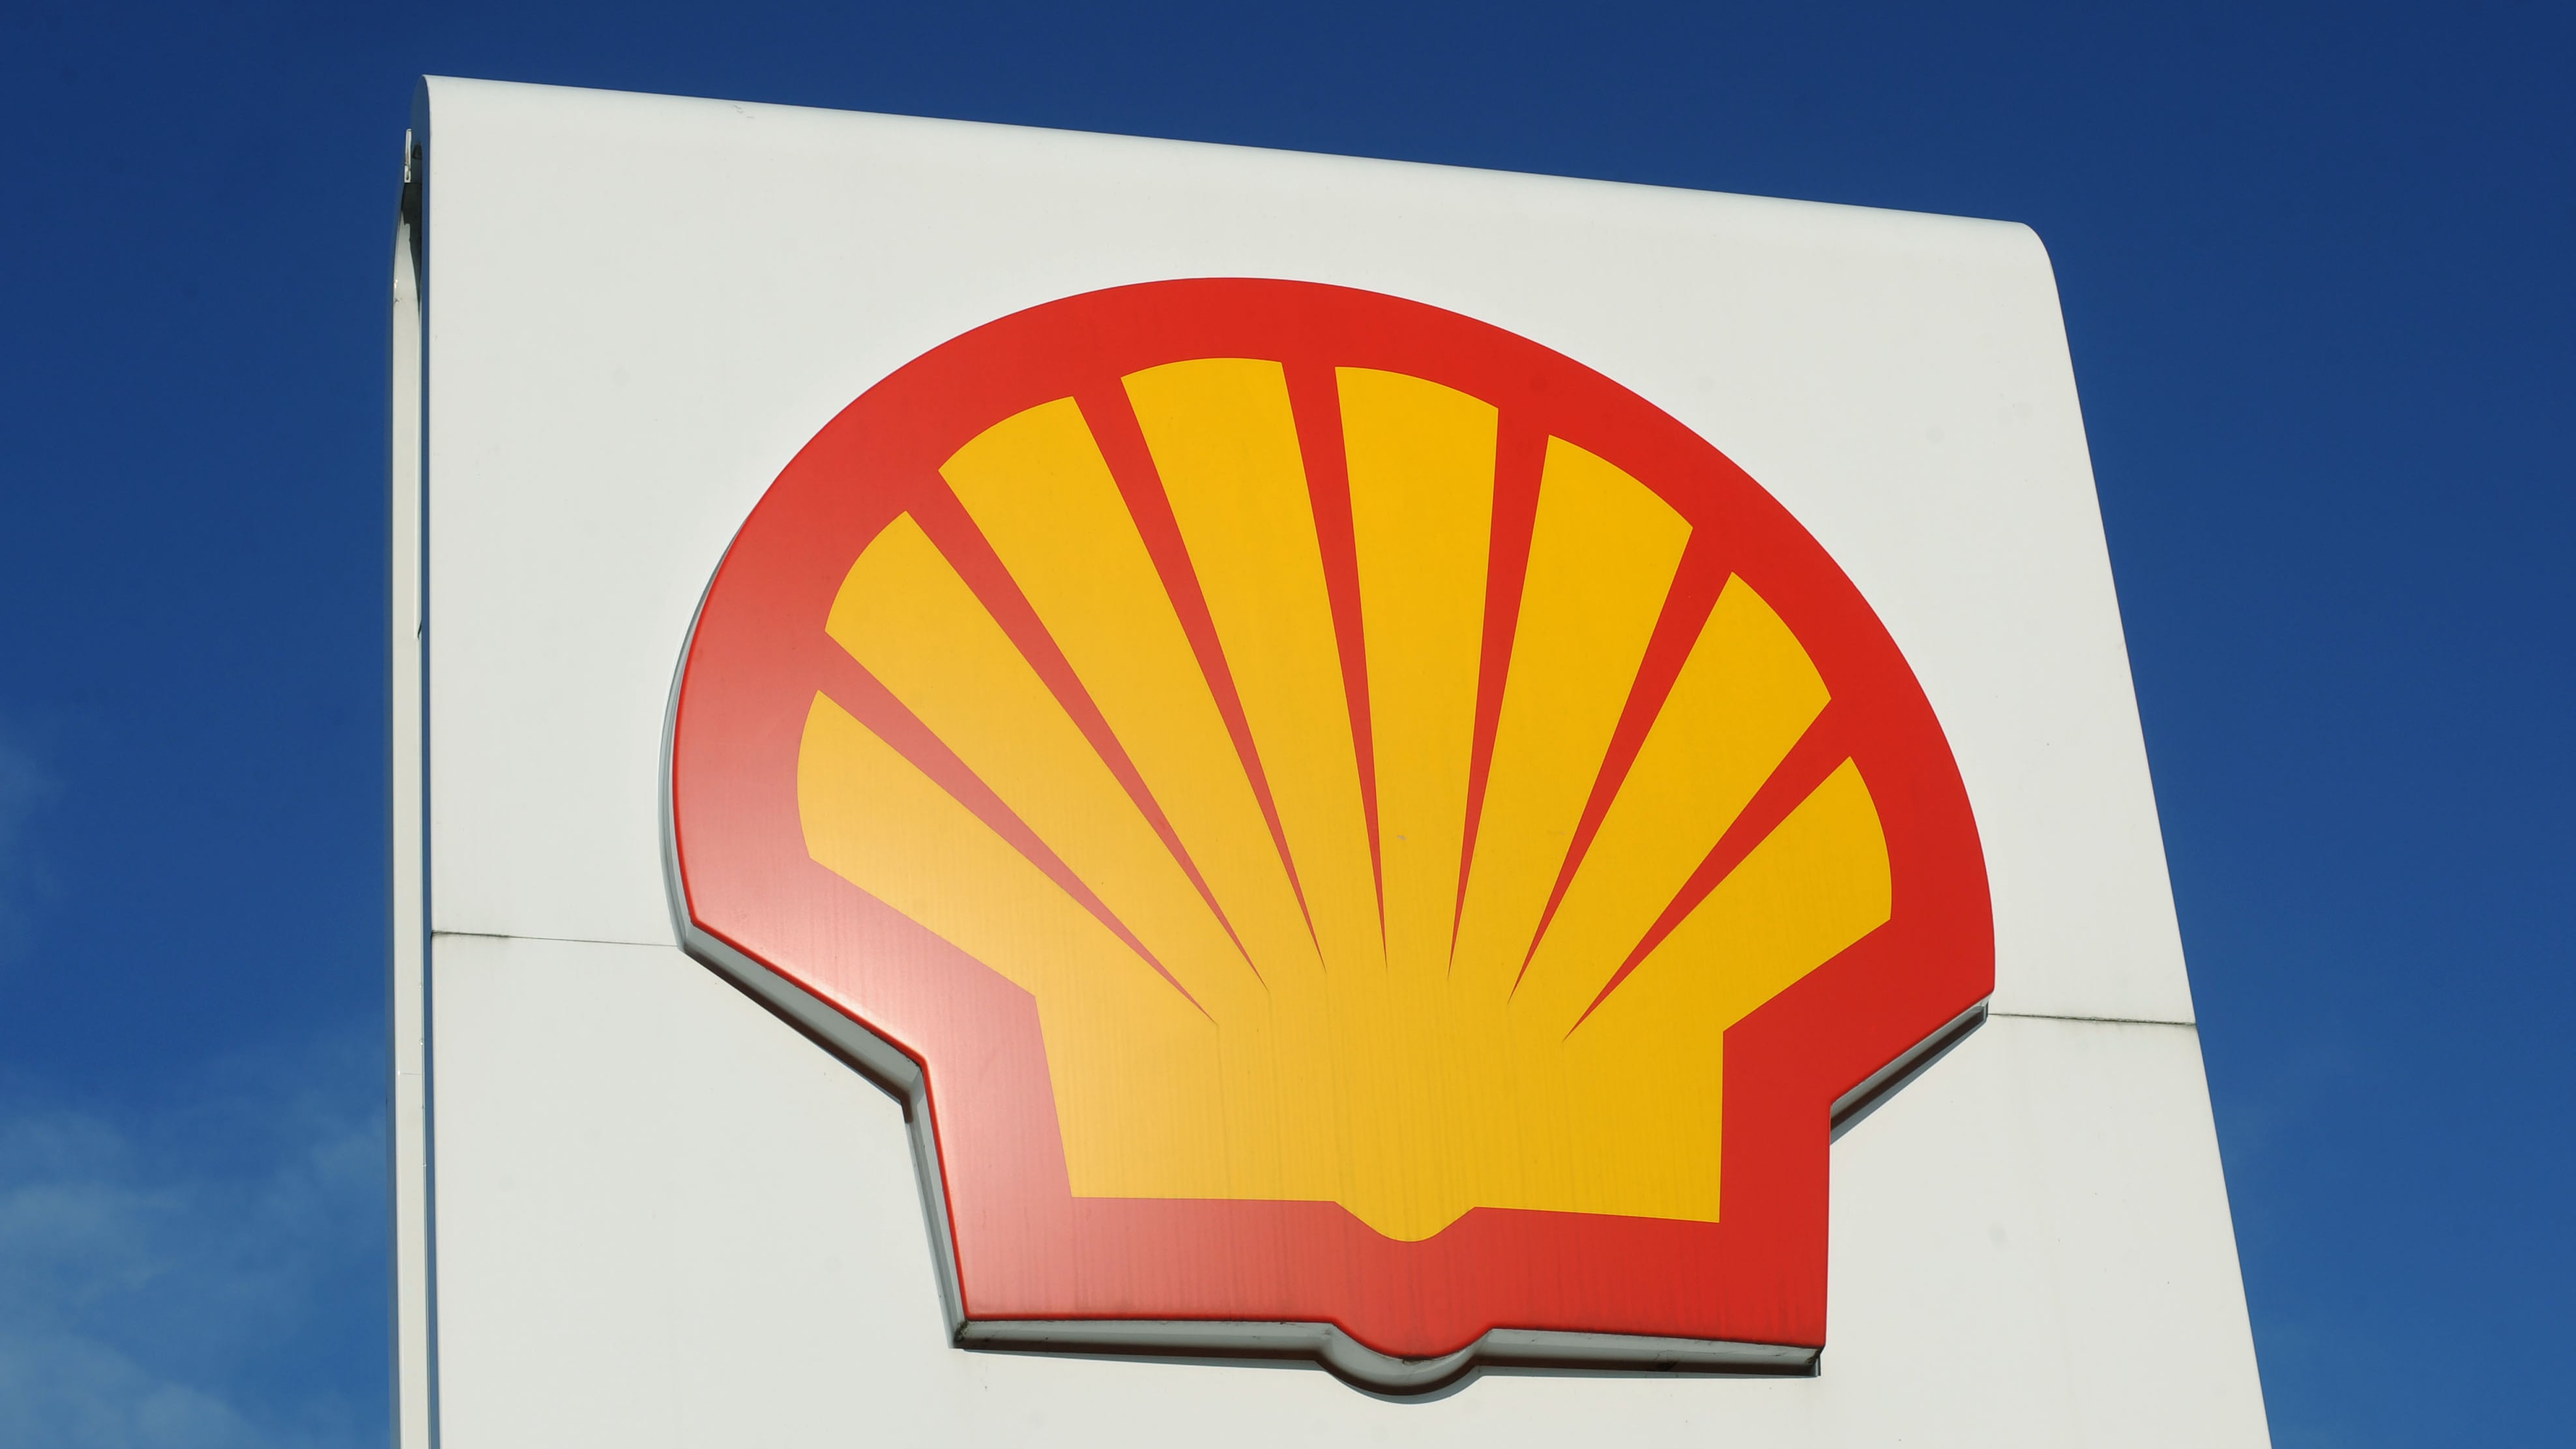 Shell started work on its plant in the Netherlands in September 2021